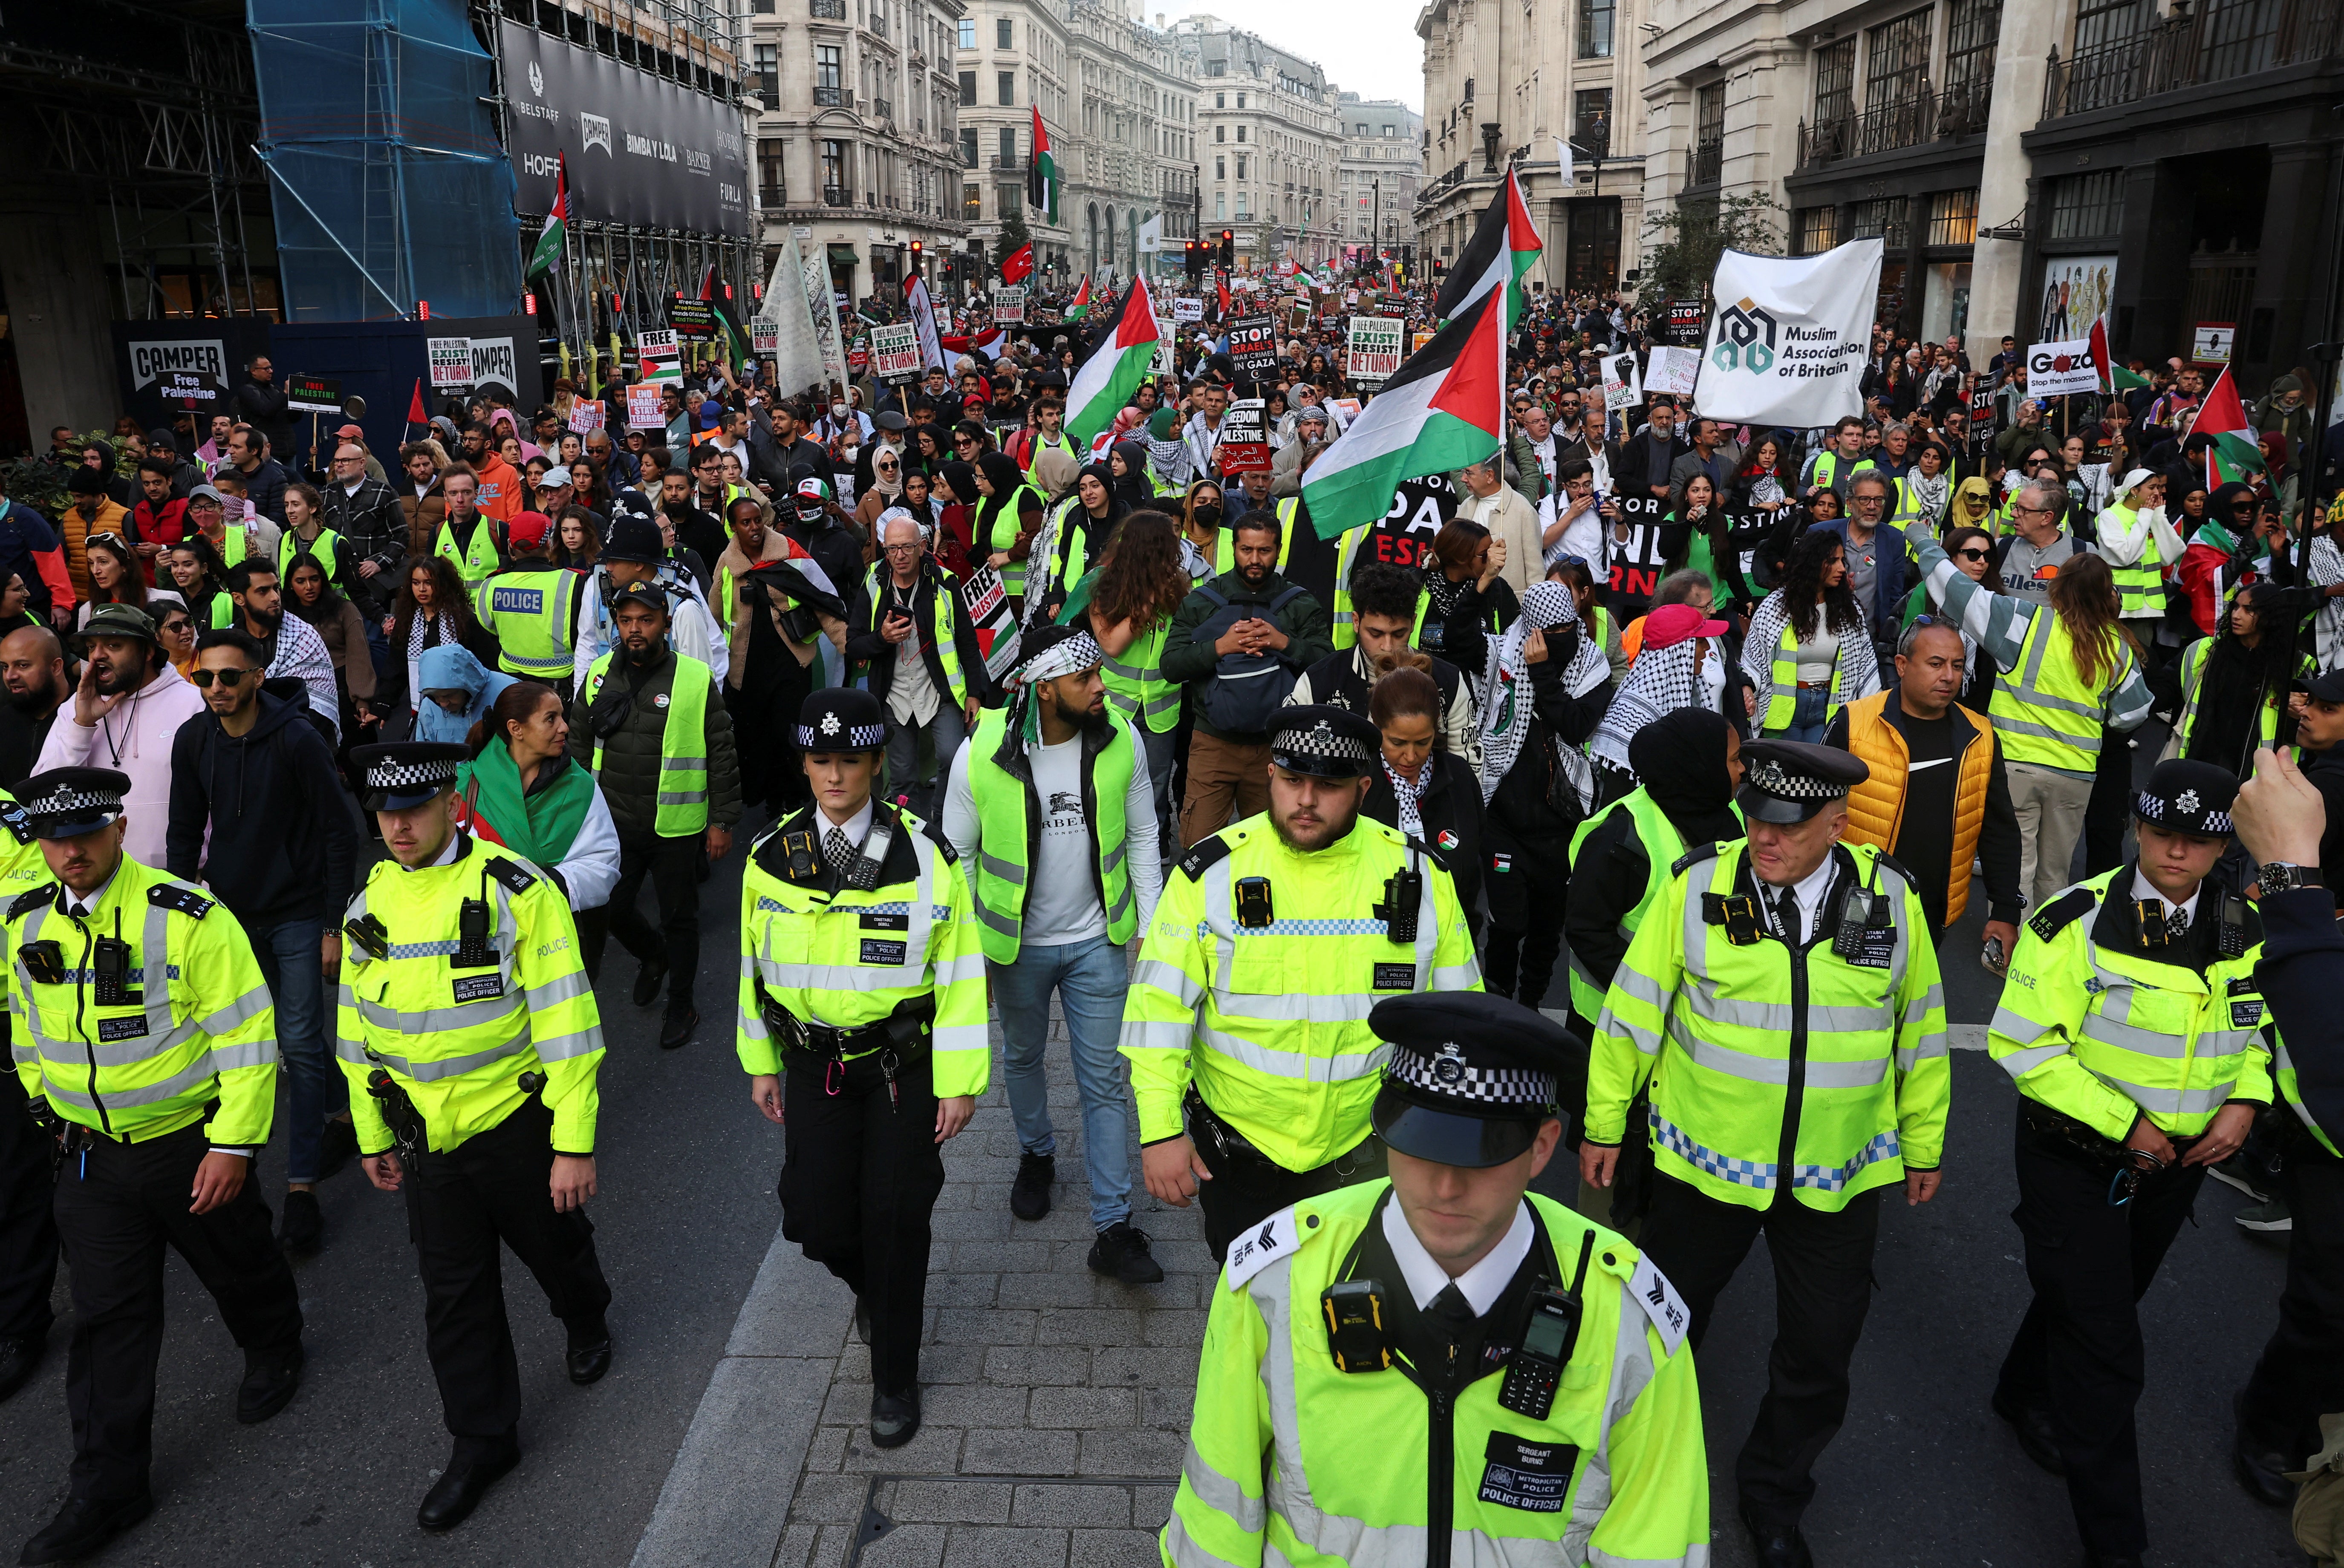 The Met Police had warned anyone showing support for Hamas could be arrested